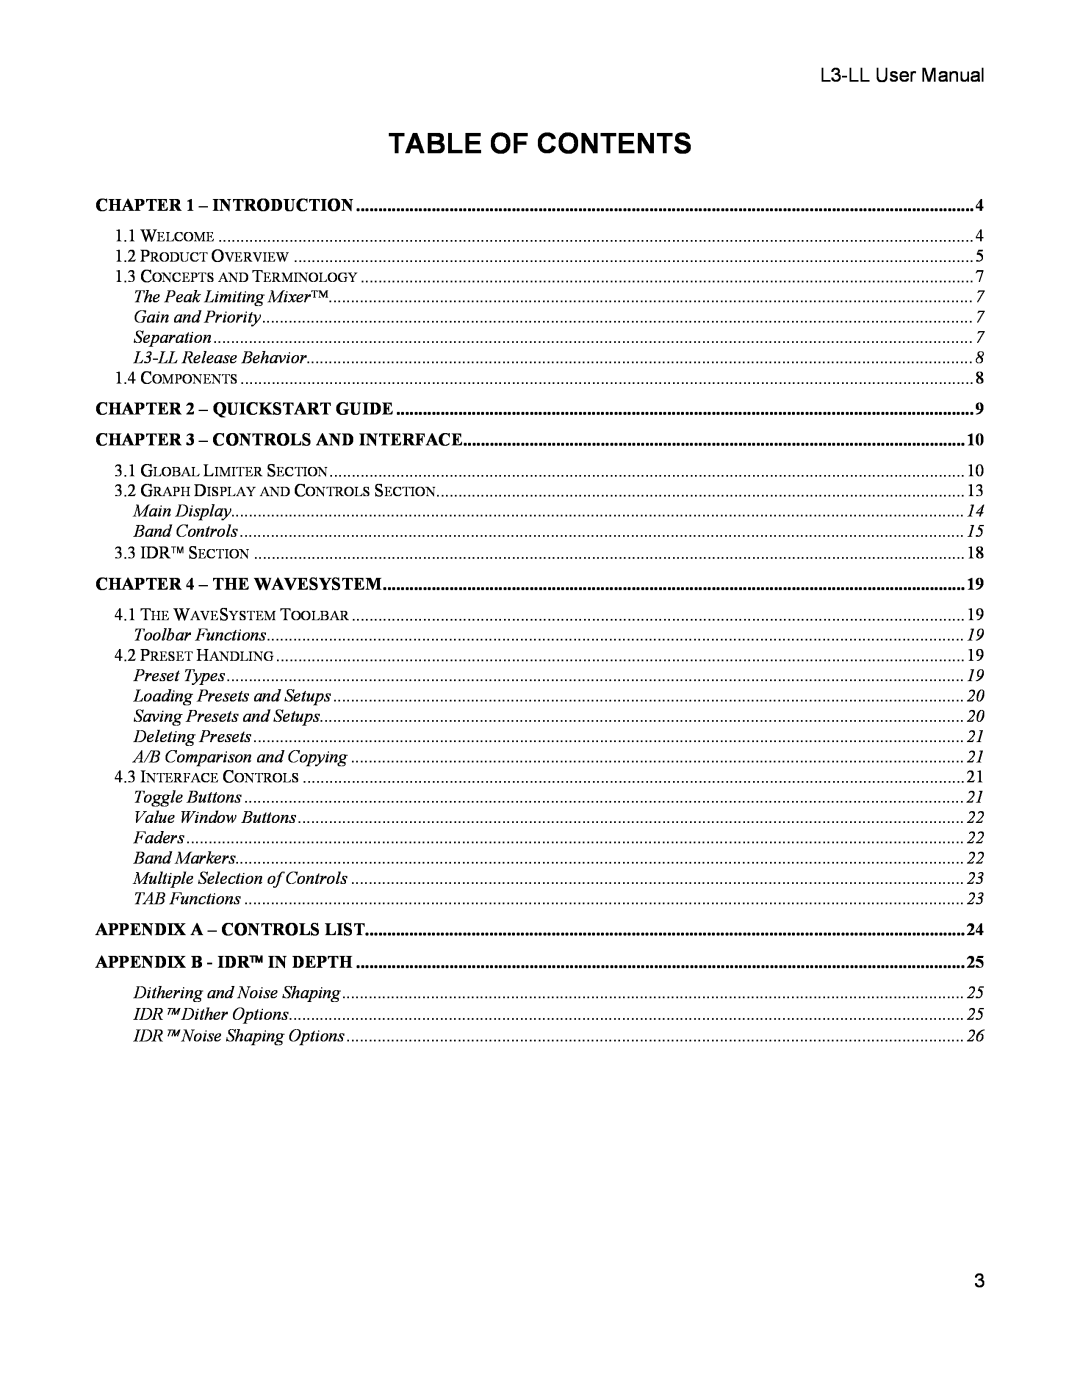 Waves L3-LL user manual Table Of Contents 